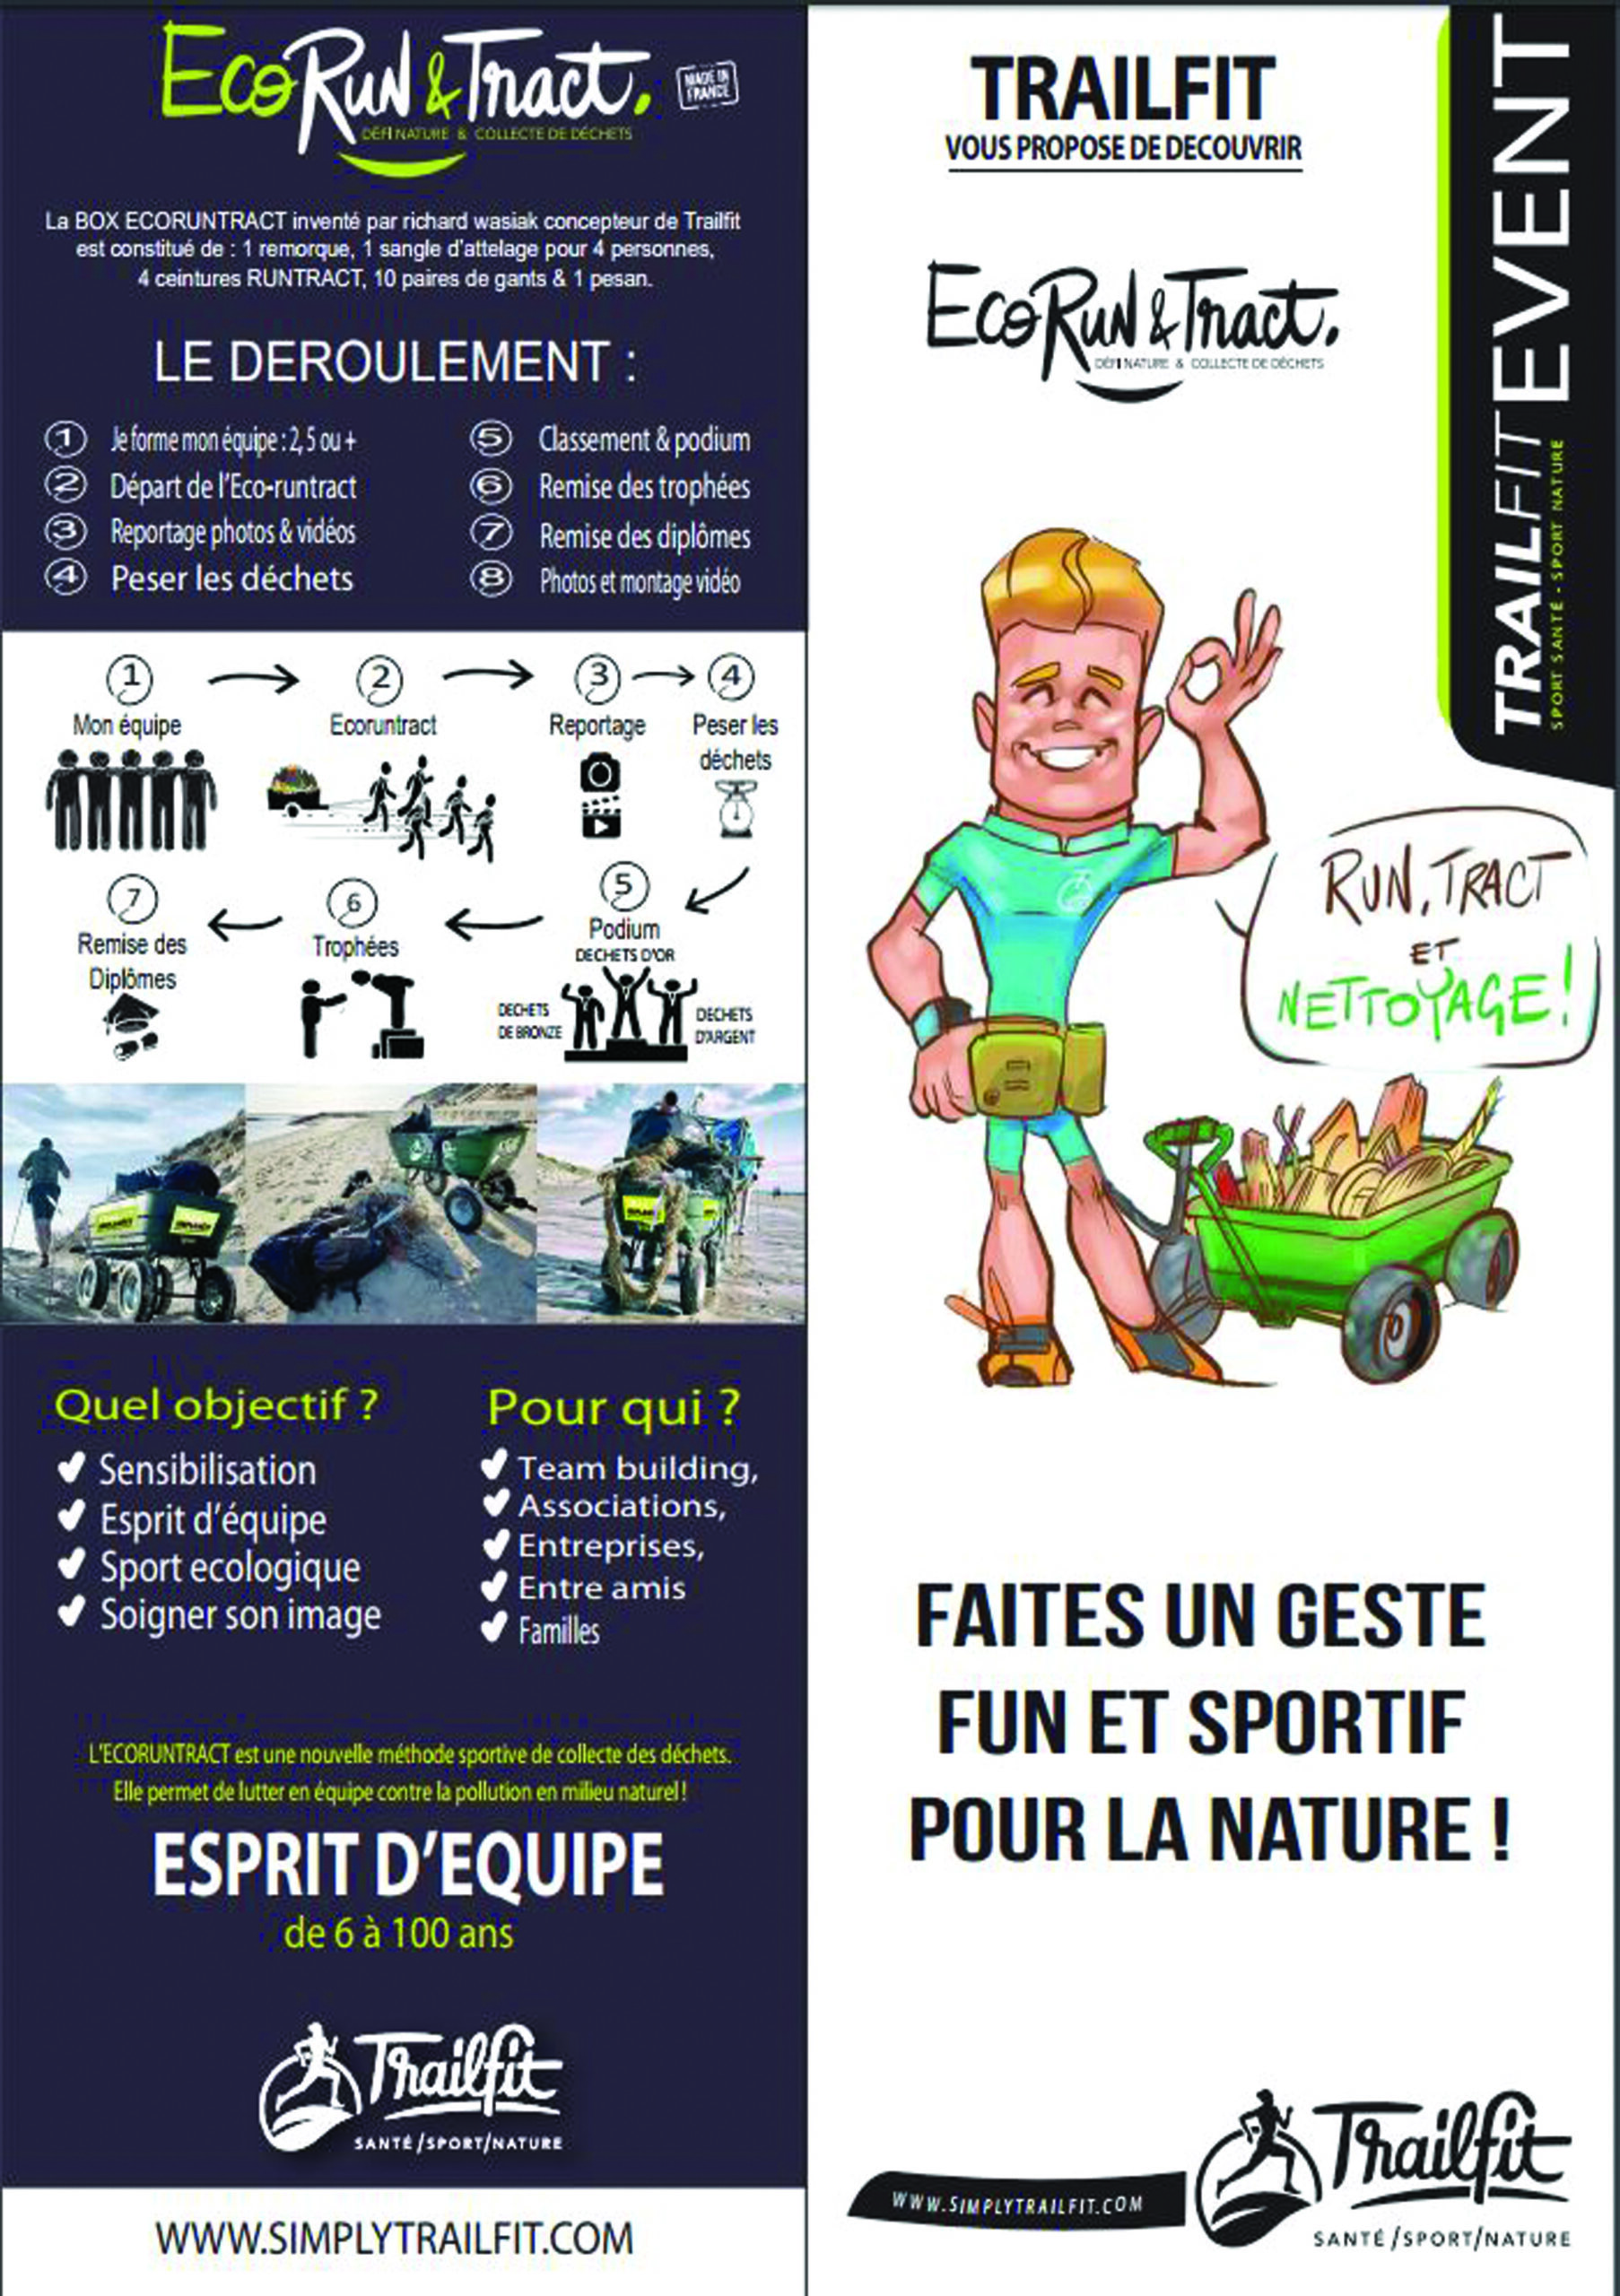 DETAIL DU PACK EVENT ECO RUN & TRACT janvier 2021